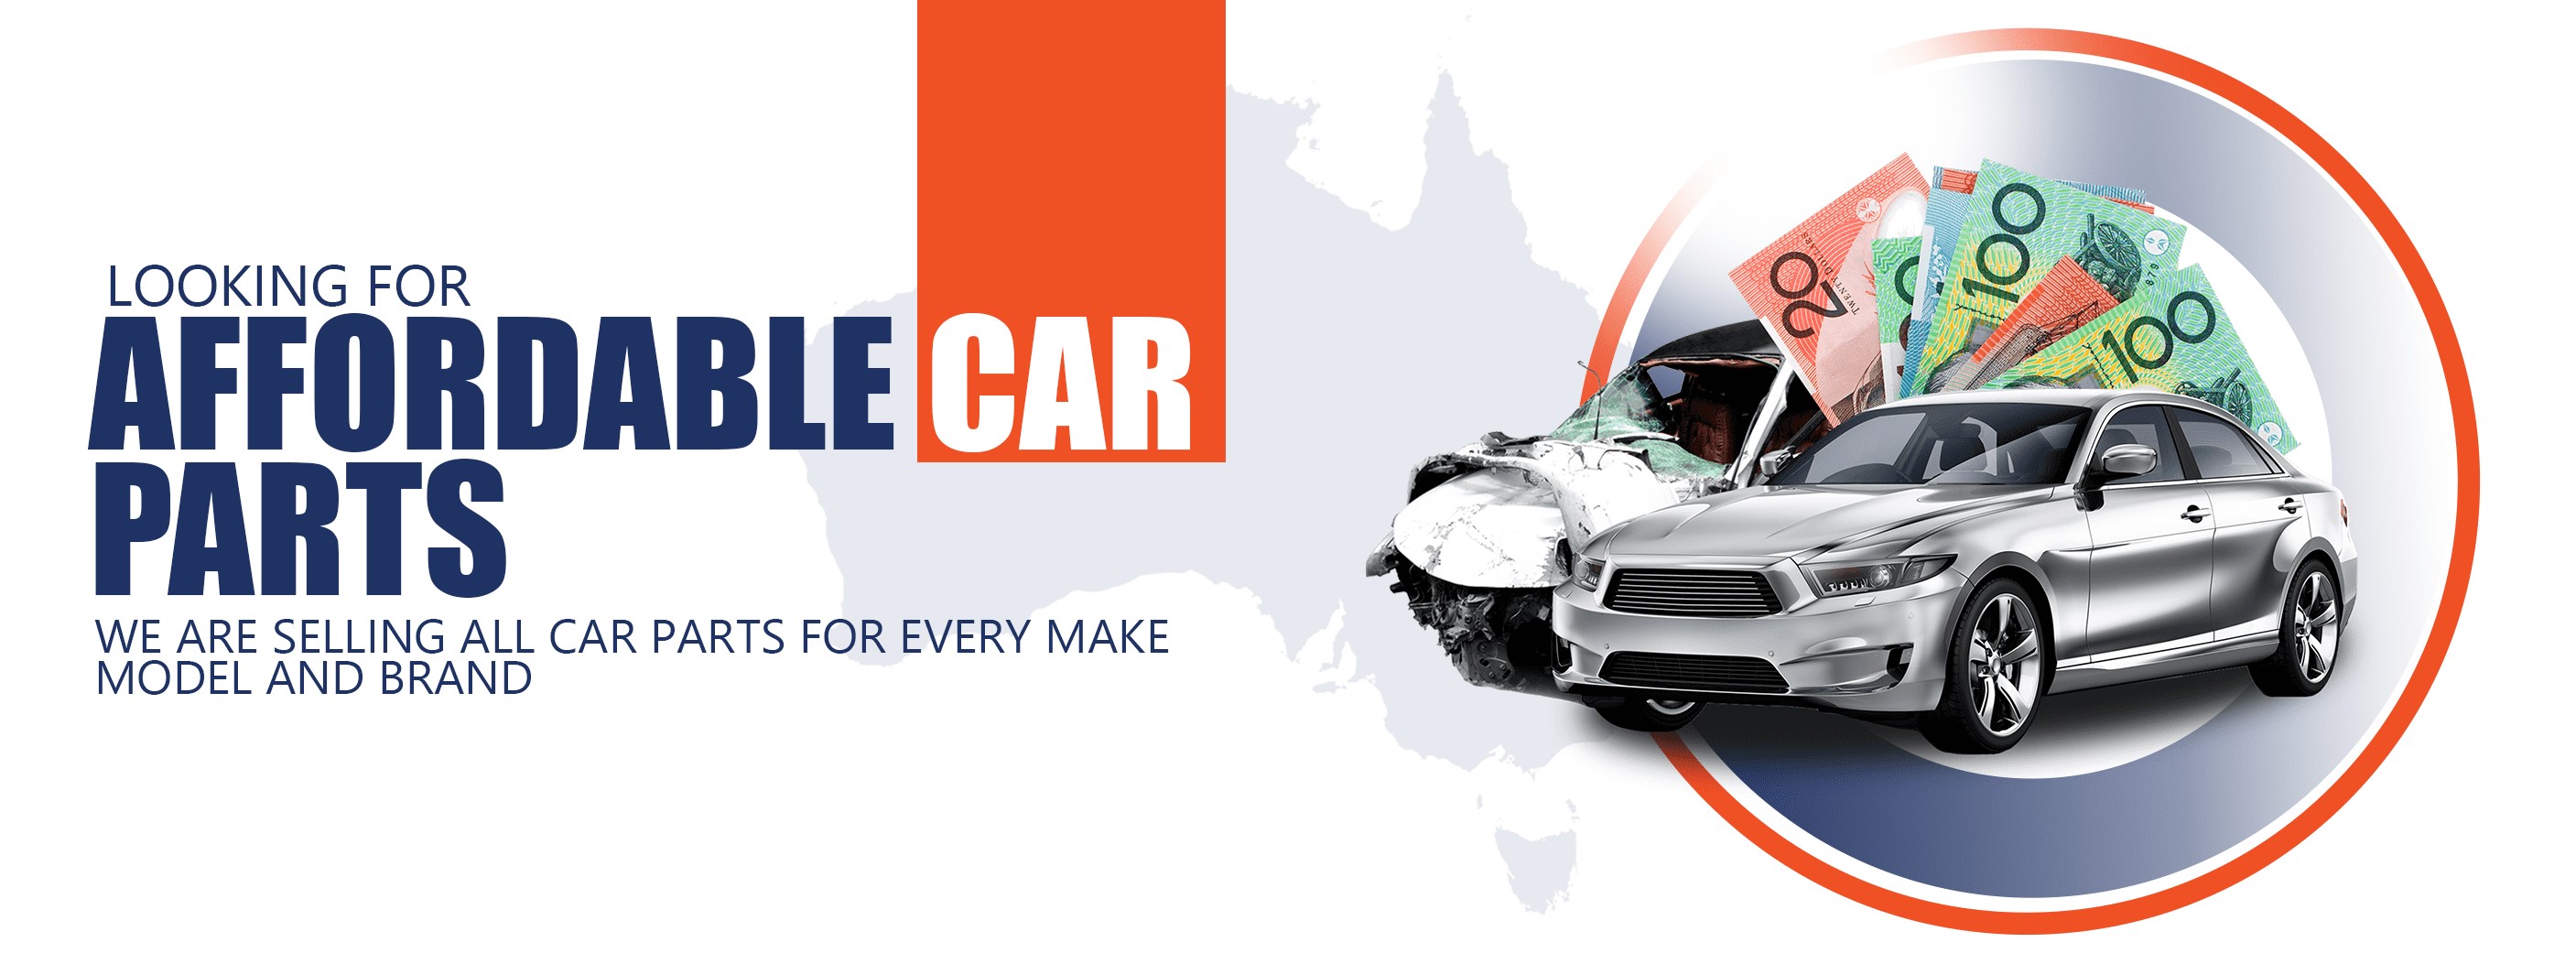 Get ultimate cash for your car. Junk car removal services